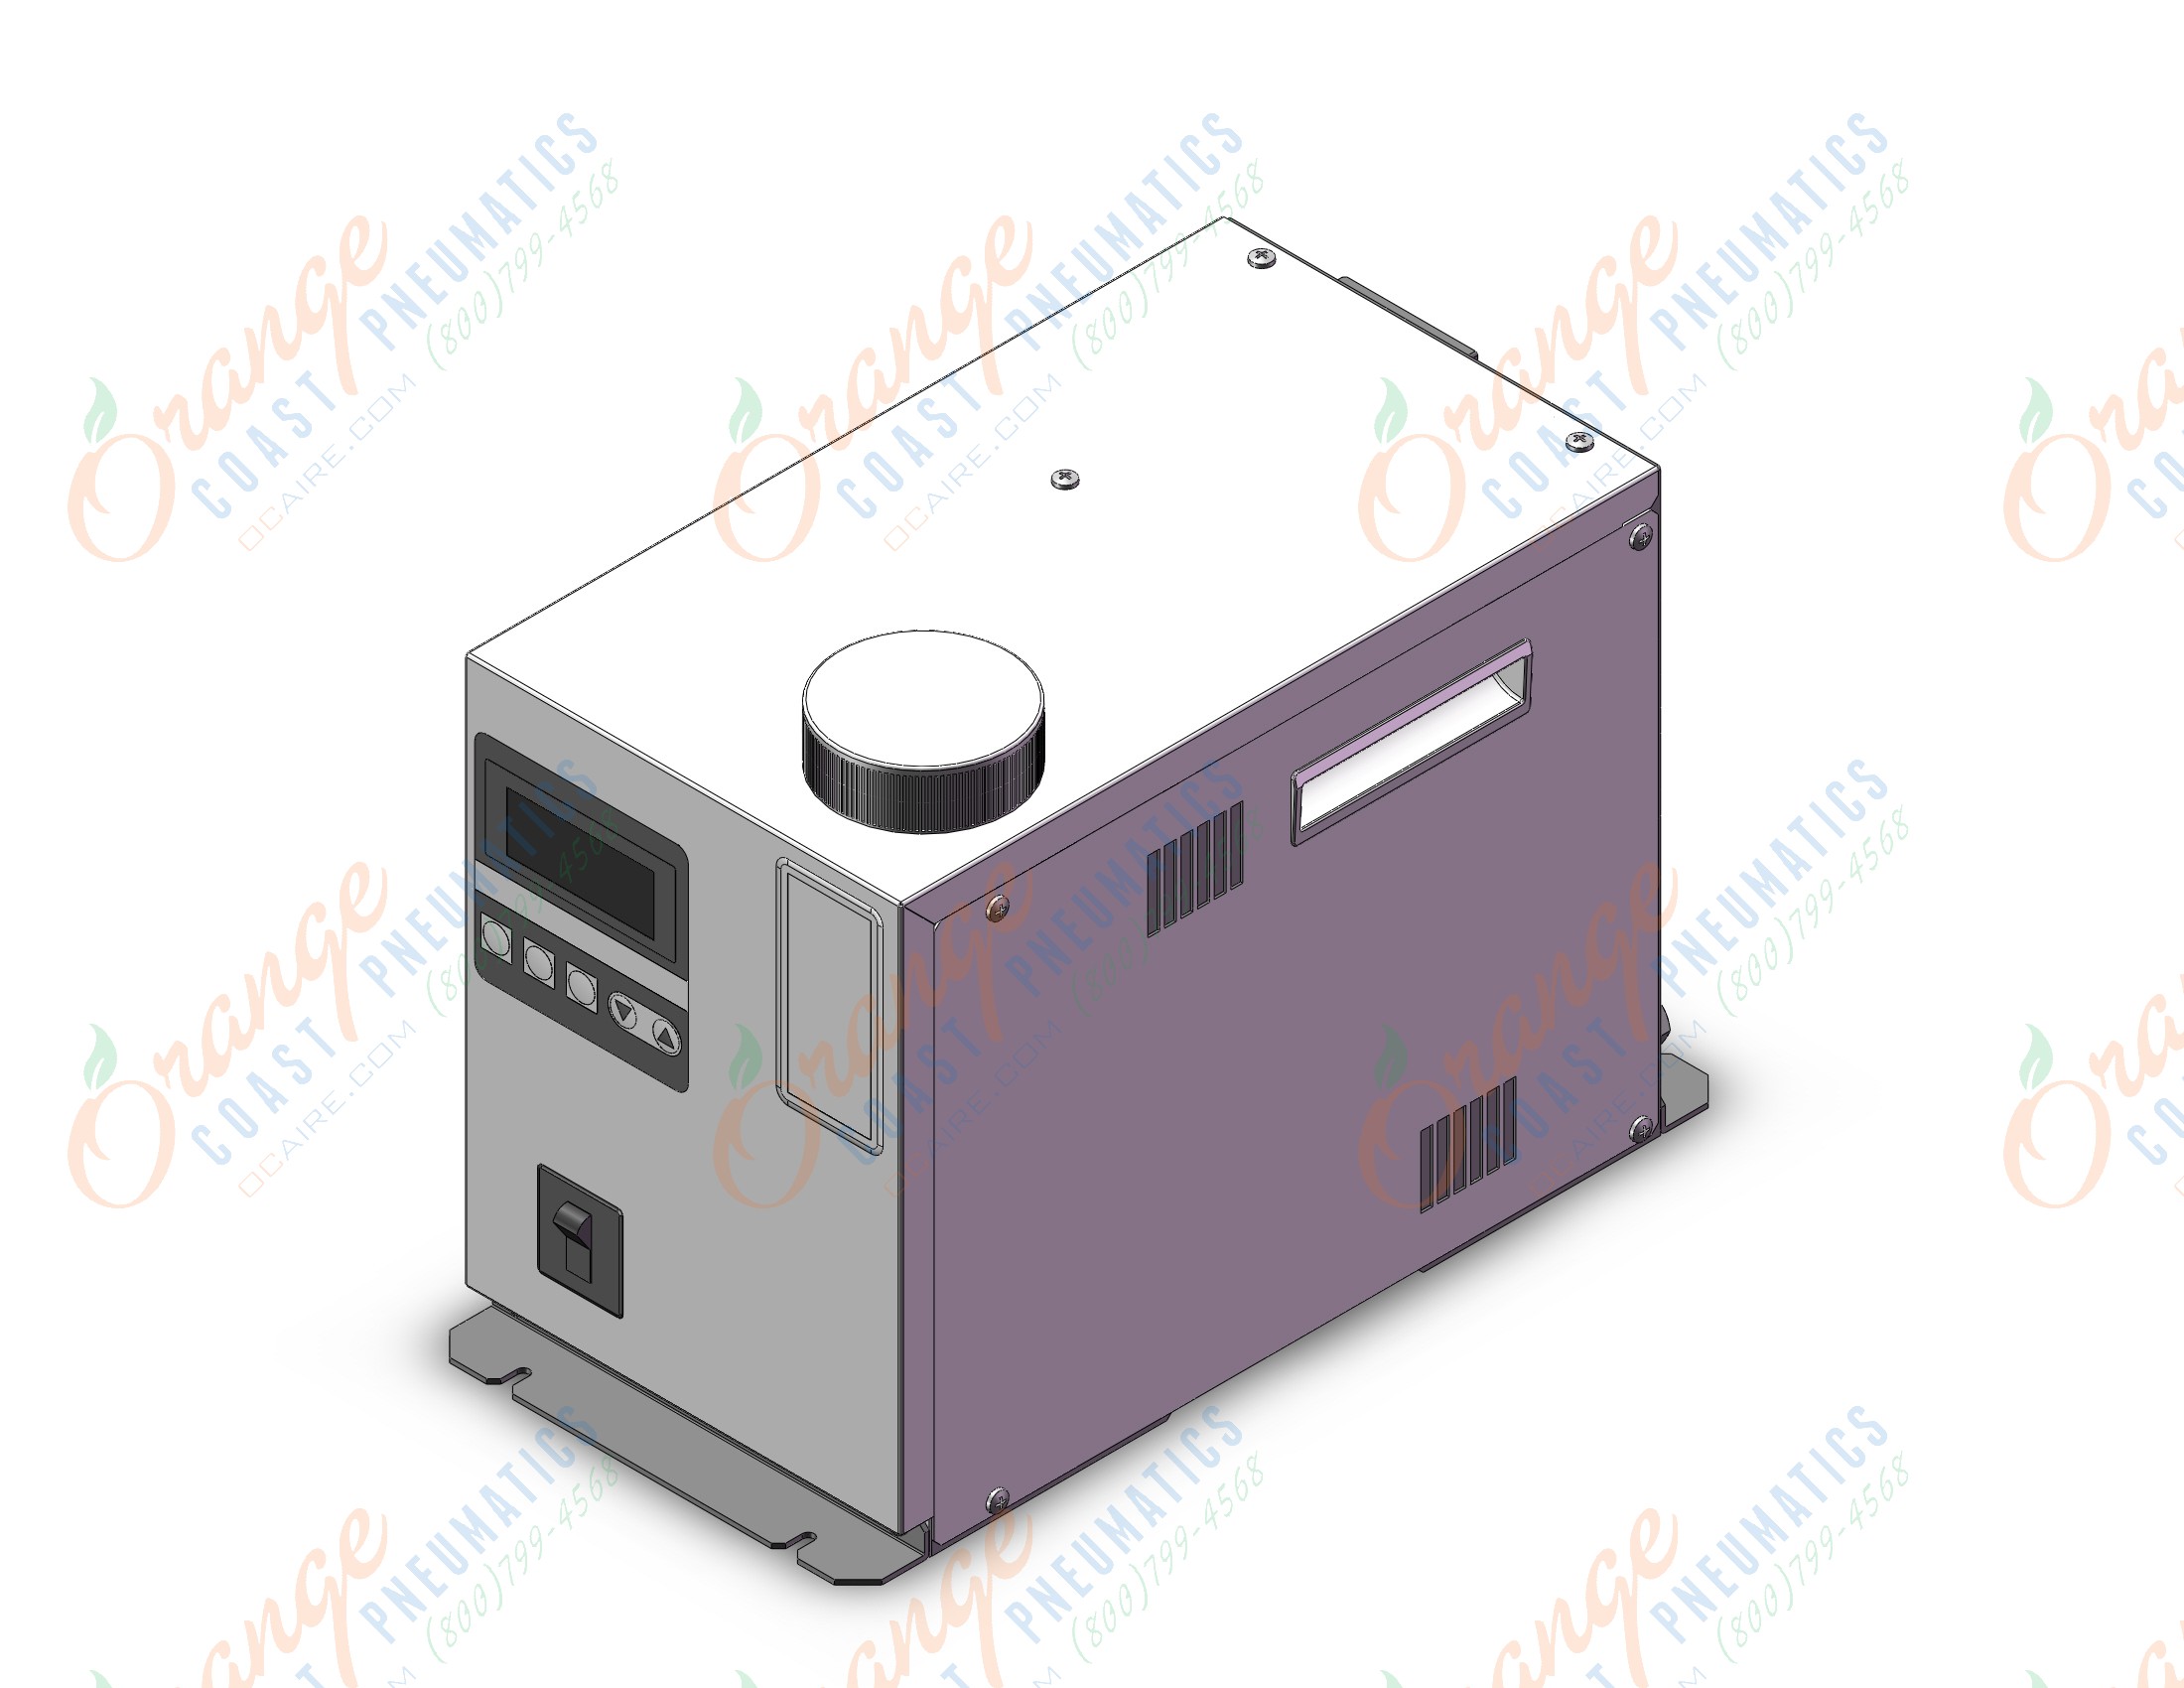 SMC HEC003-W5B-N thermo-con, water cooled, HEC THERMO CONTROLLER***